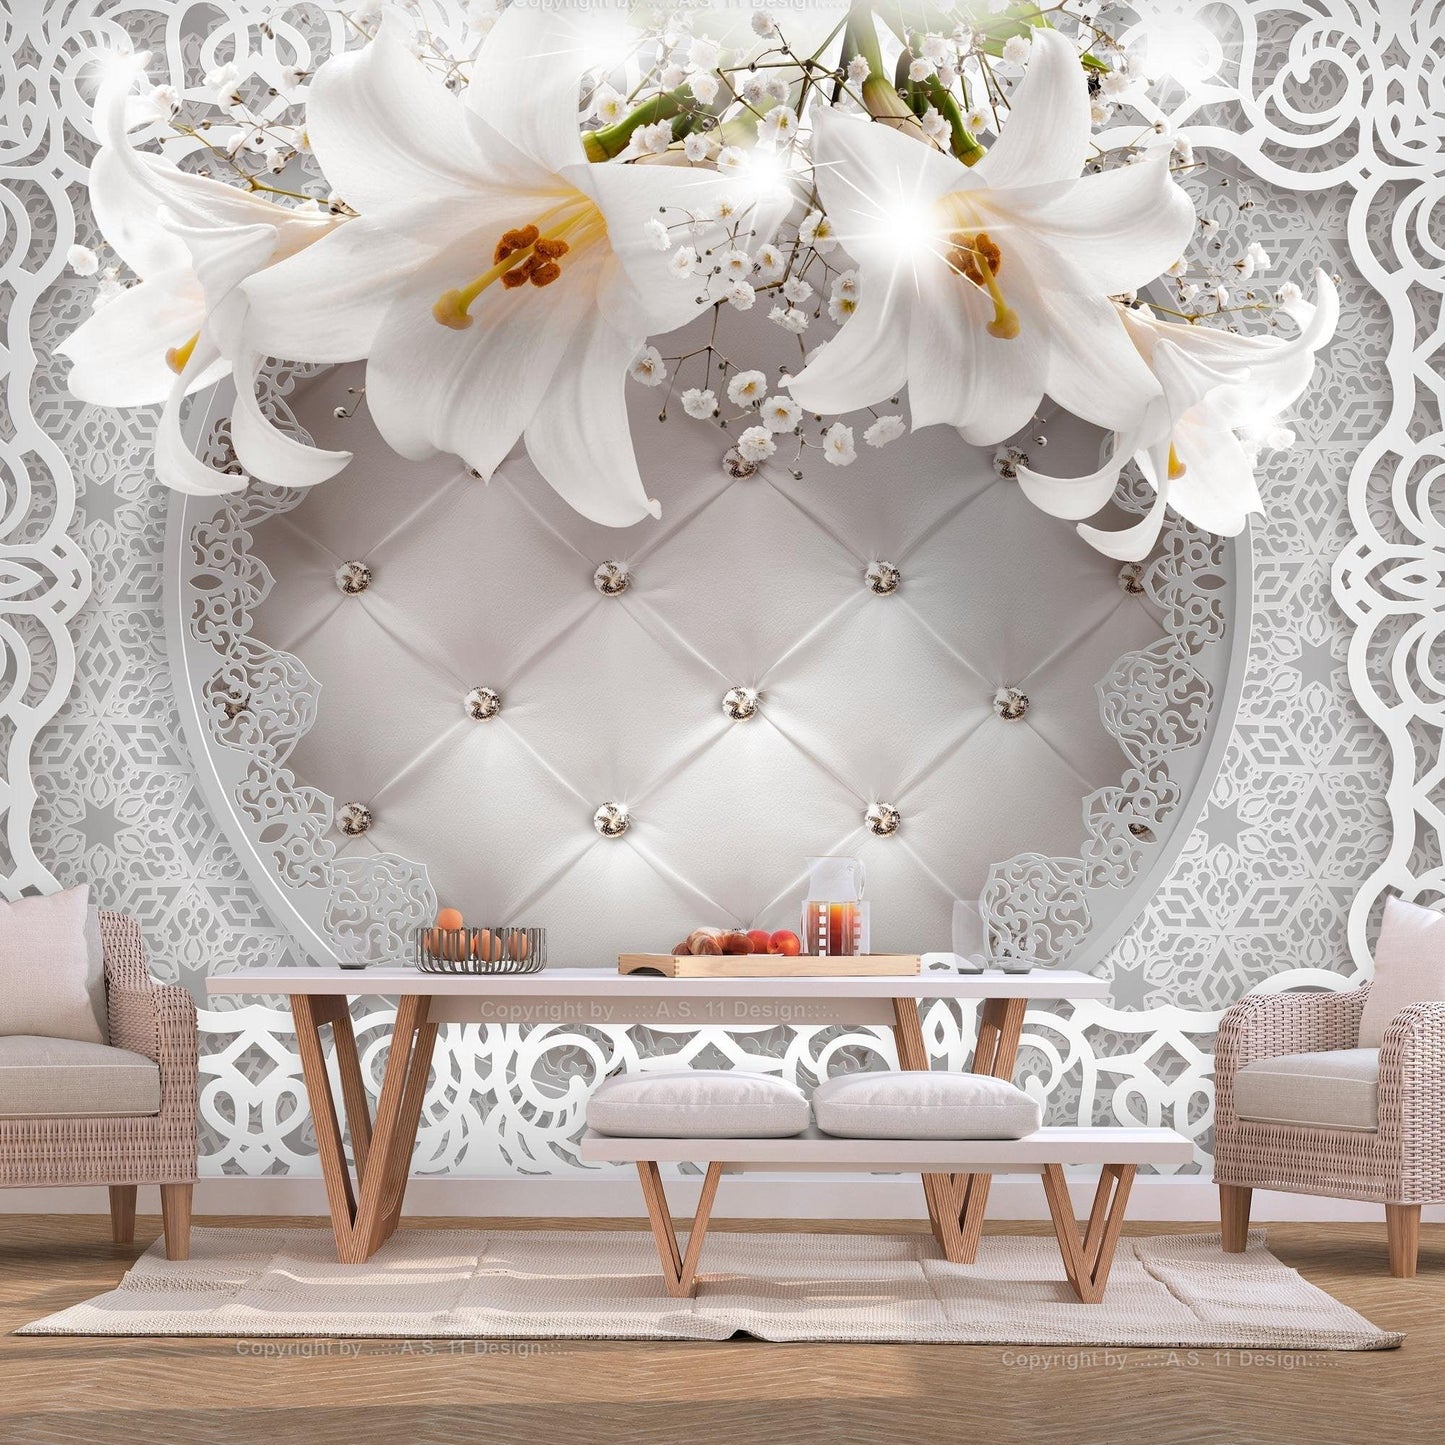 Peel and stick wall mural - Lilies and Quilted Background - www.trendingbestsellers.com